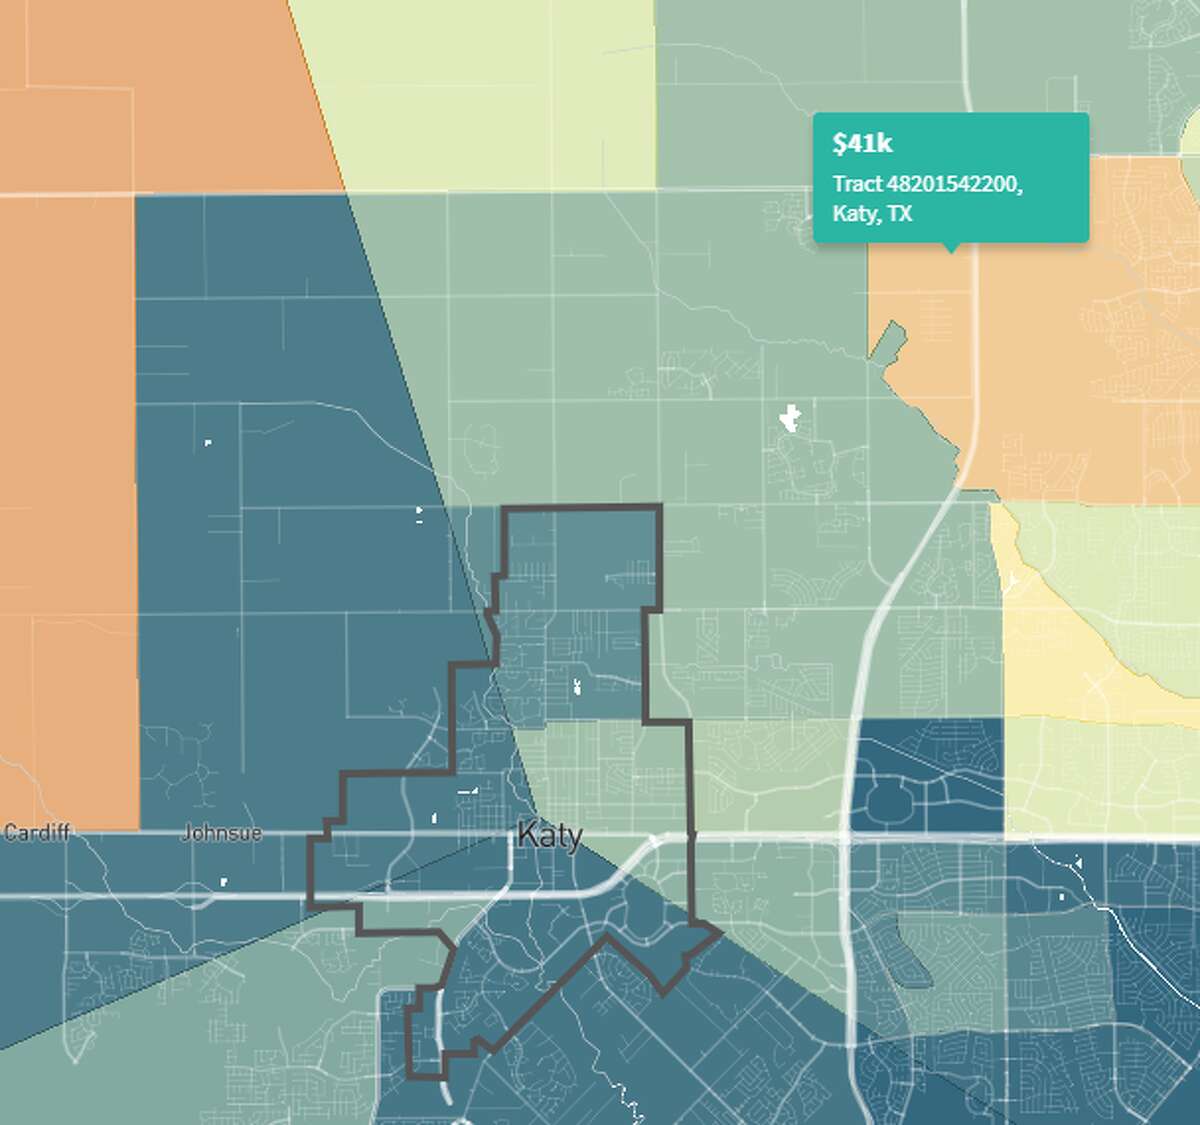 KatyLOWEST: Children born between 1978-1983 in this portion of northern Katy off the Grand Parkway and Clay Road are expected to earn $41,000 per year in household income in their 30s today.